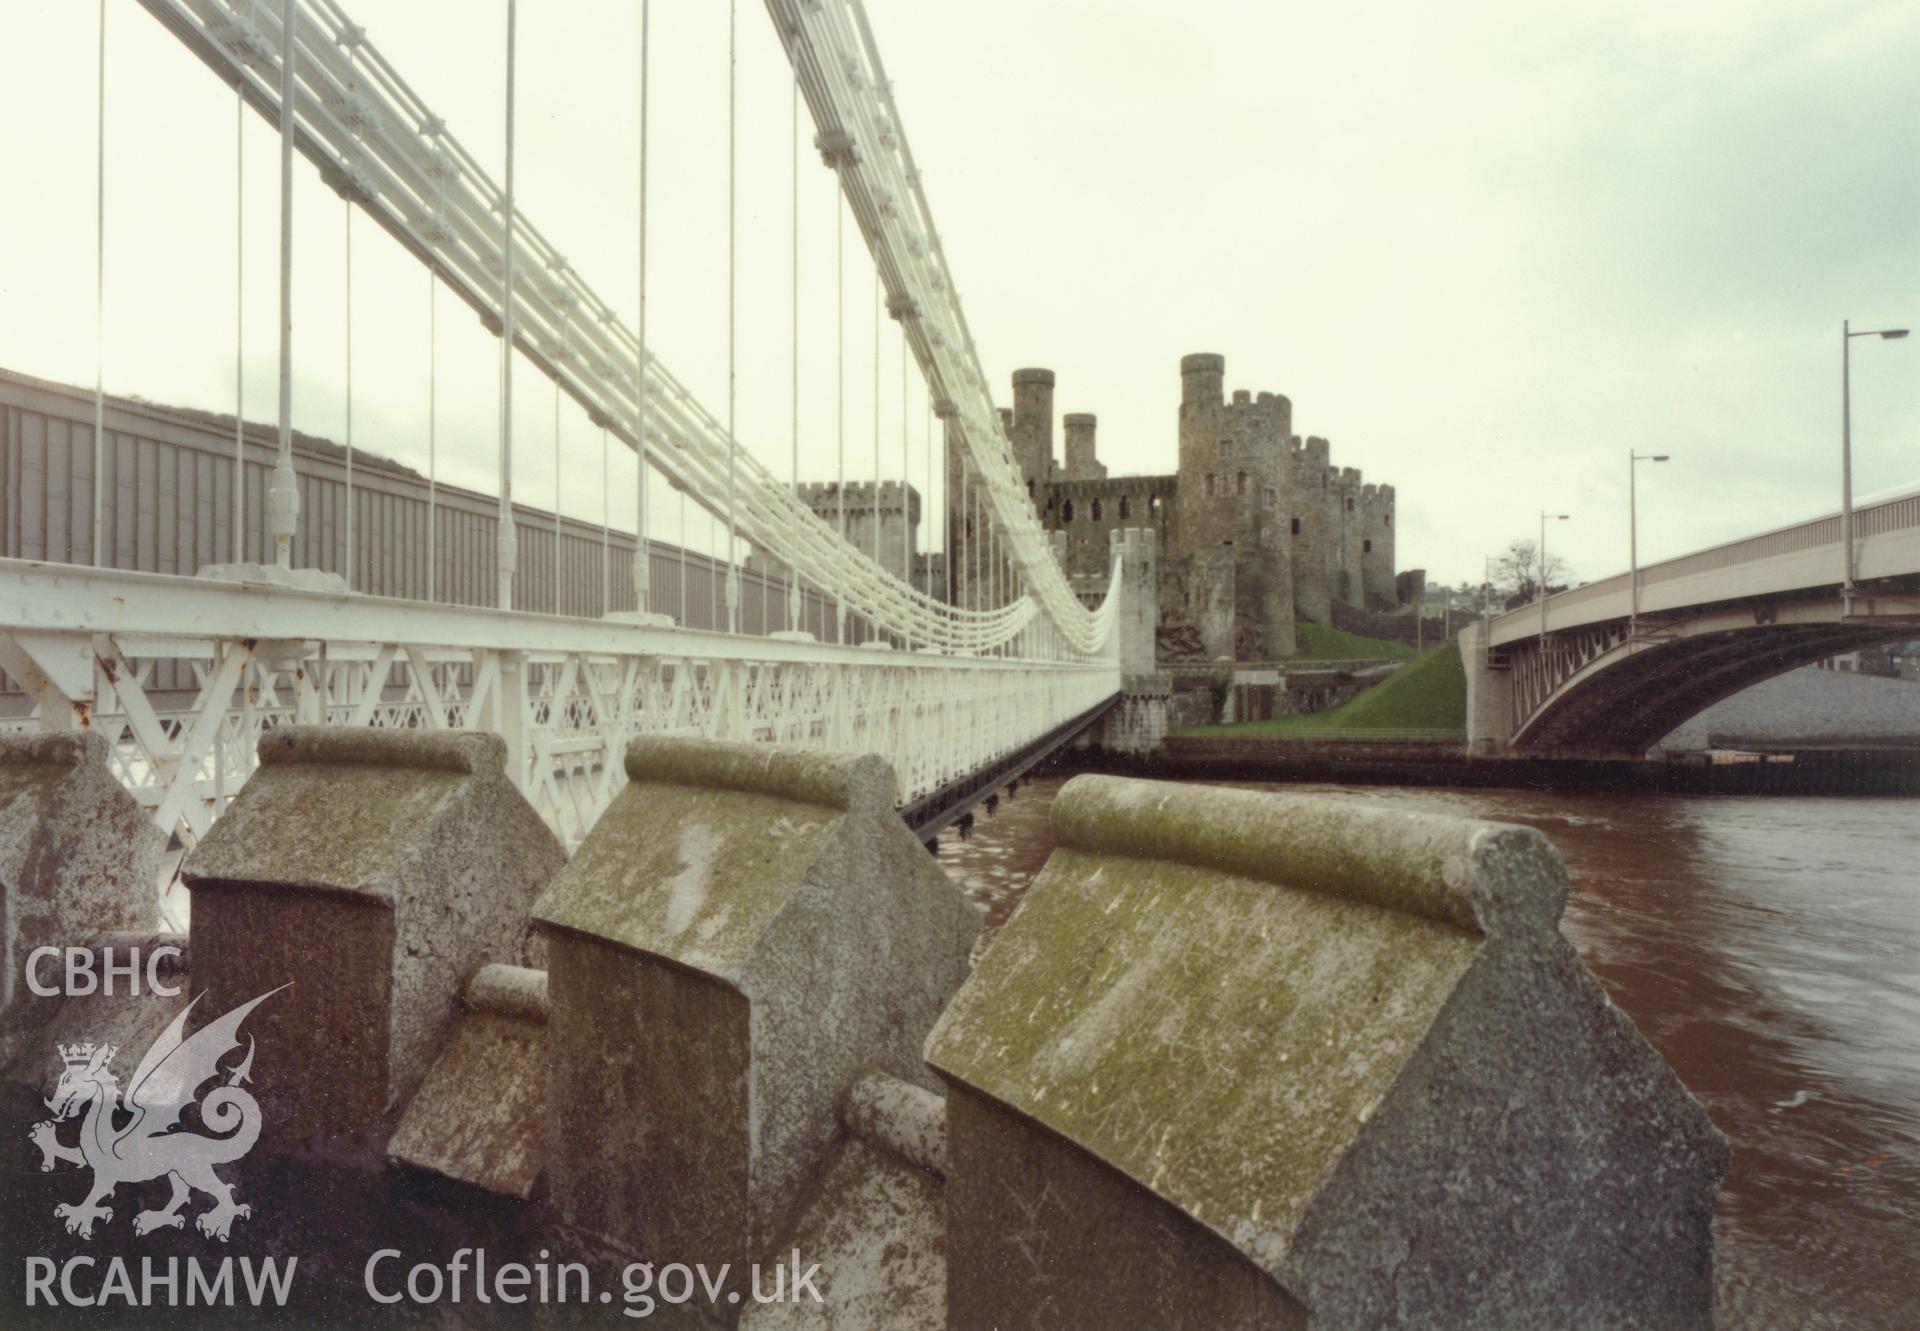 1 of a set of 27 colour prints: print showing view of Conwy castle with bridges, collated by the former Central Office of Information.